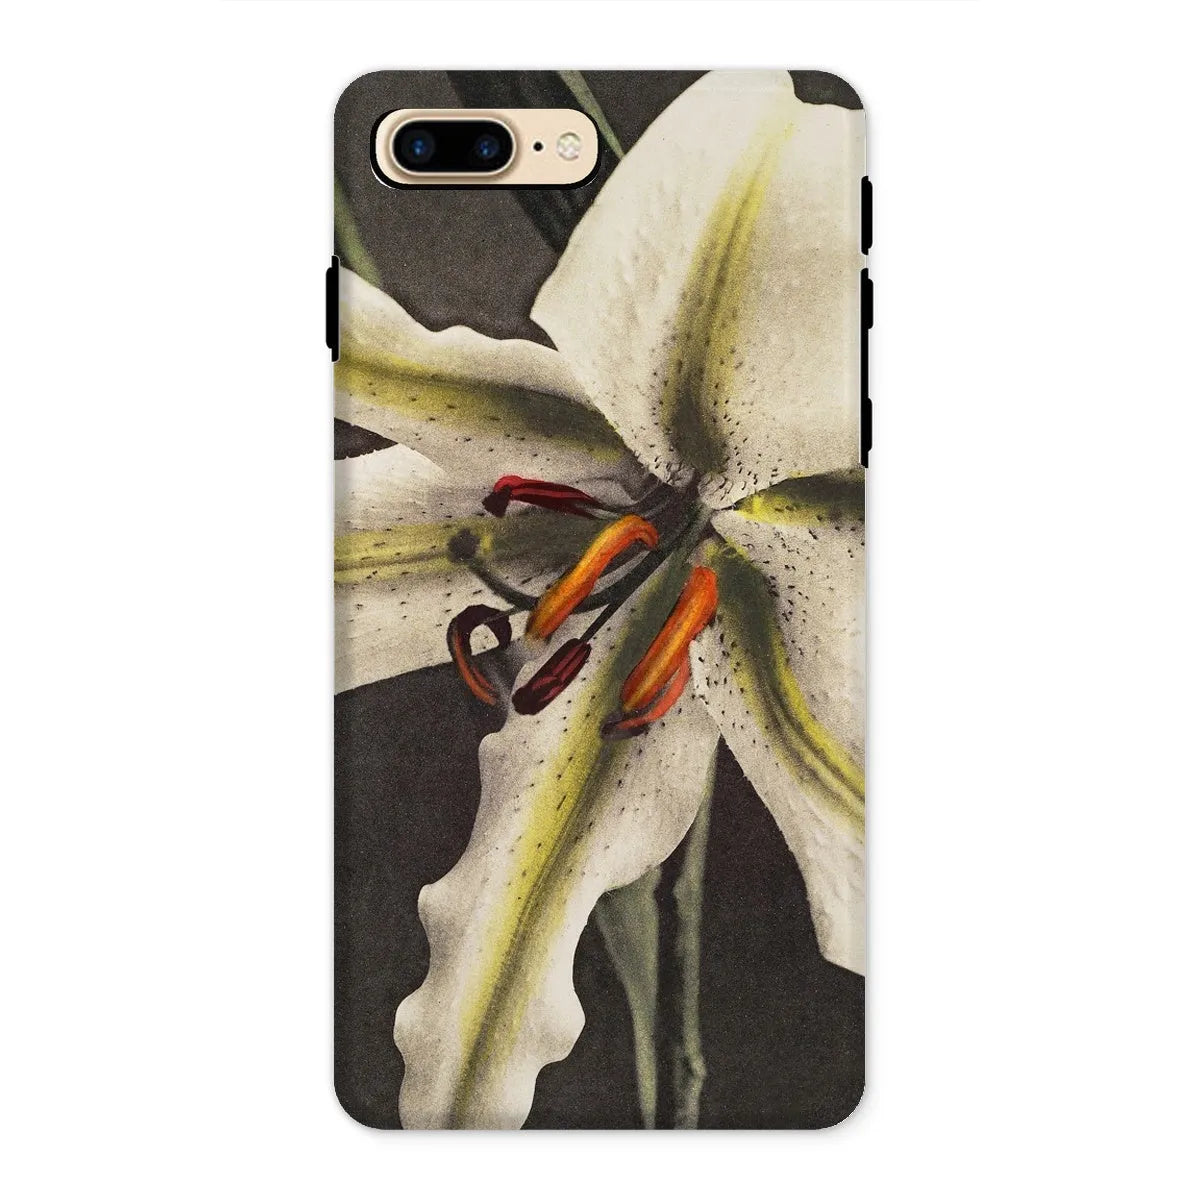 Lily By Kazumasa Ogawa Art Phone Case - Iphone 8 Plus / Matte - Mobile Phone Cases - Aesthetic Art